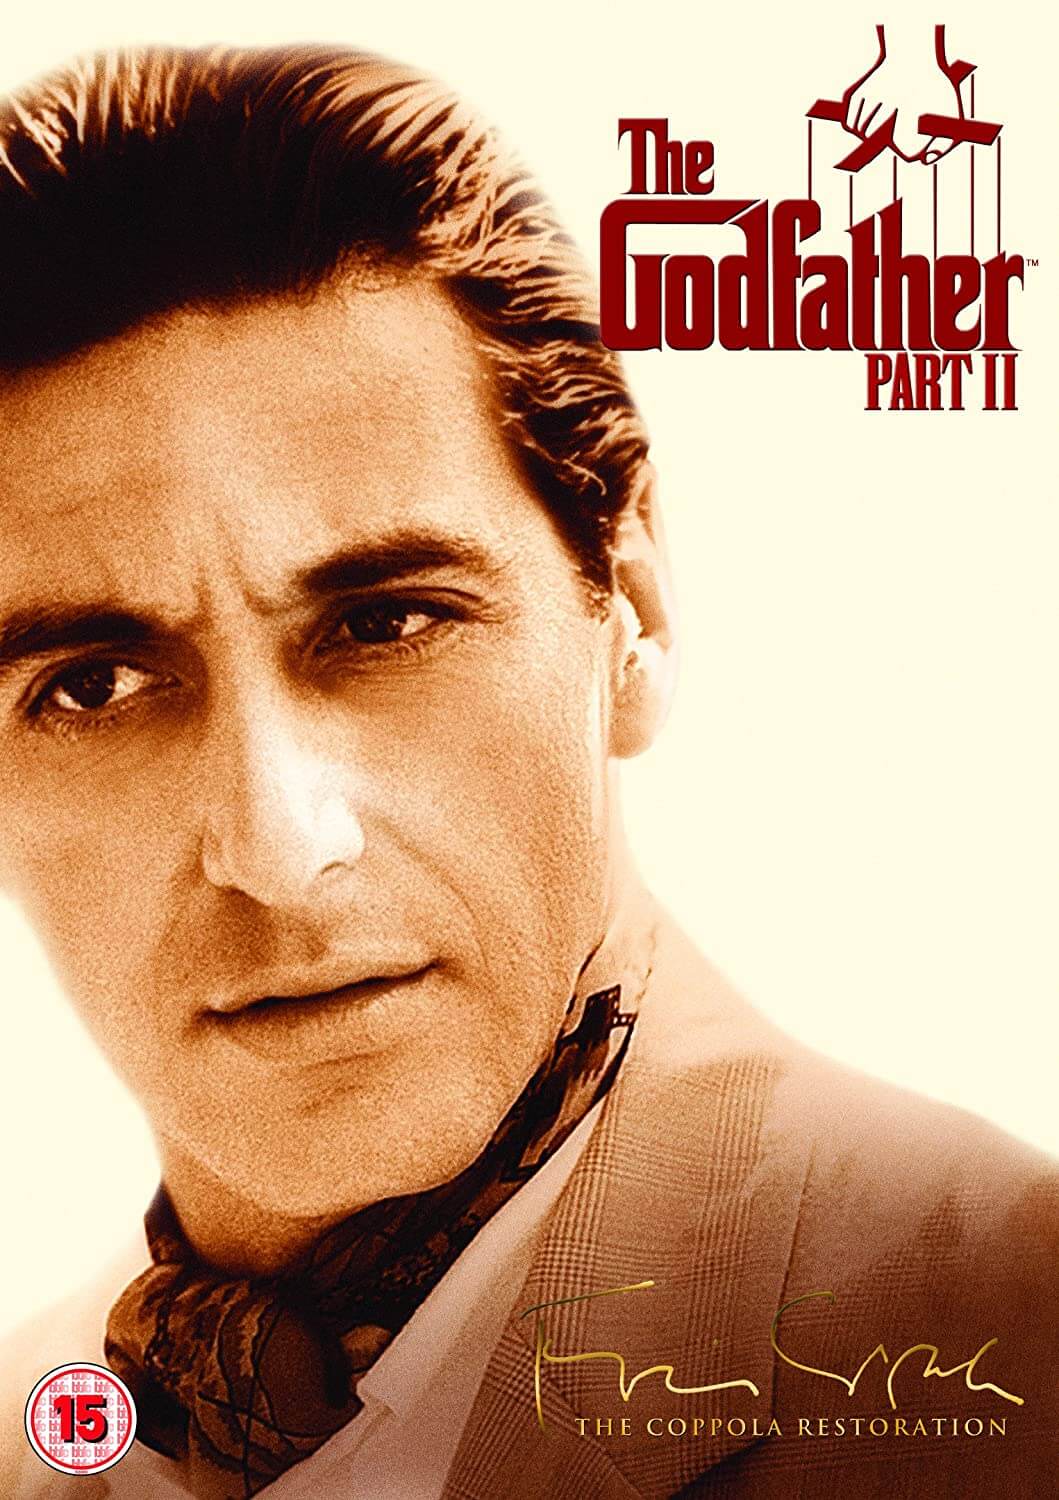 "The Godfather Part 2"